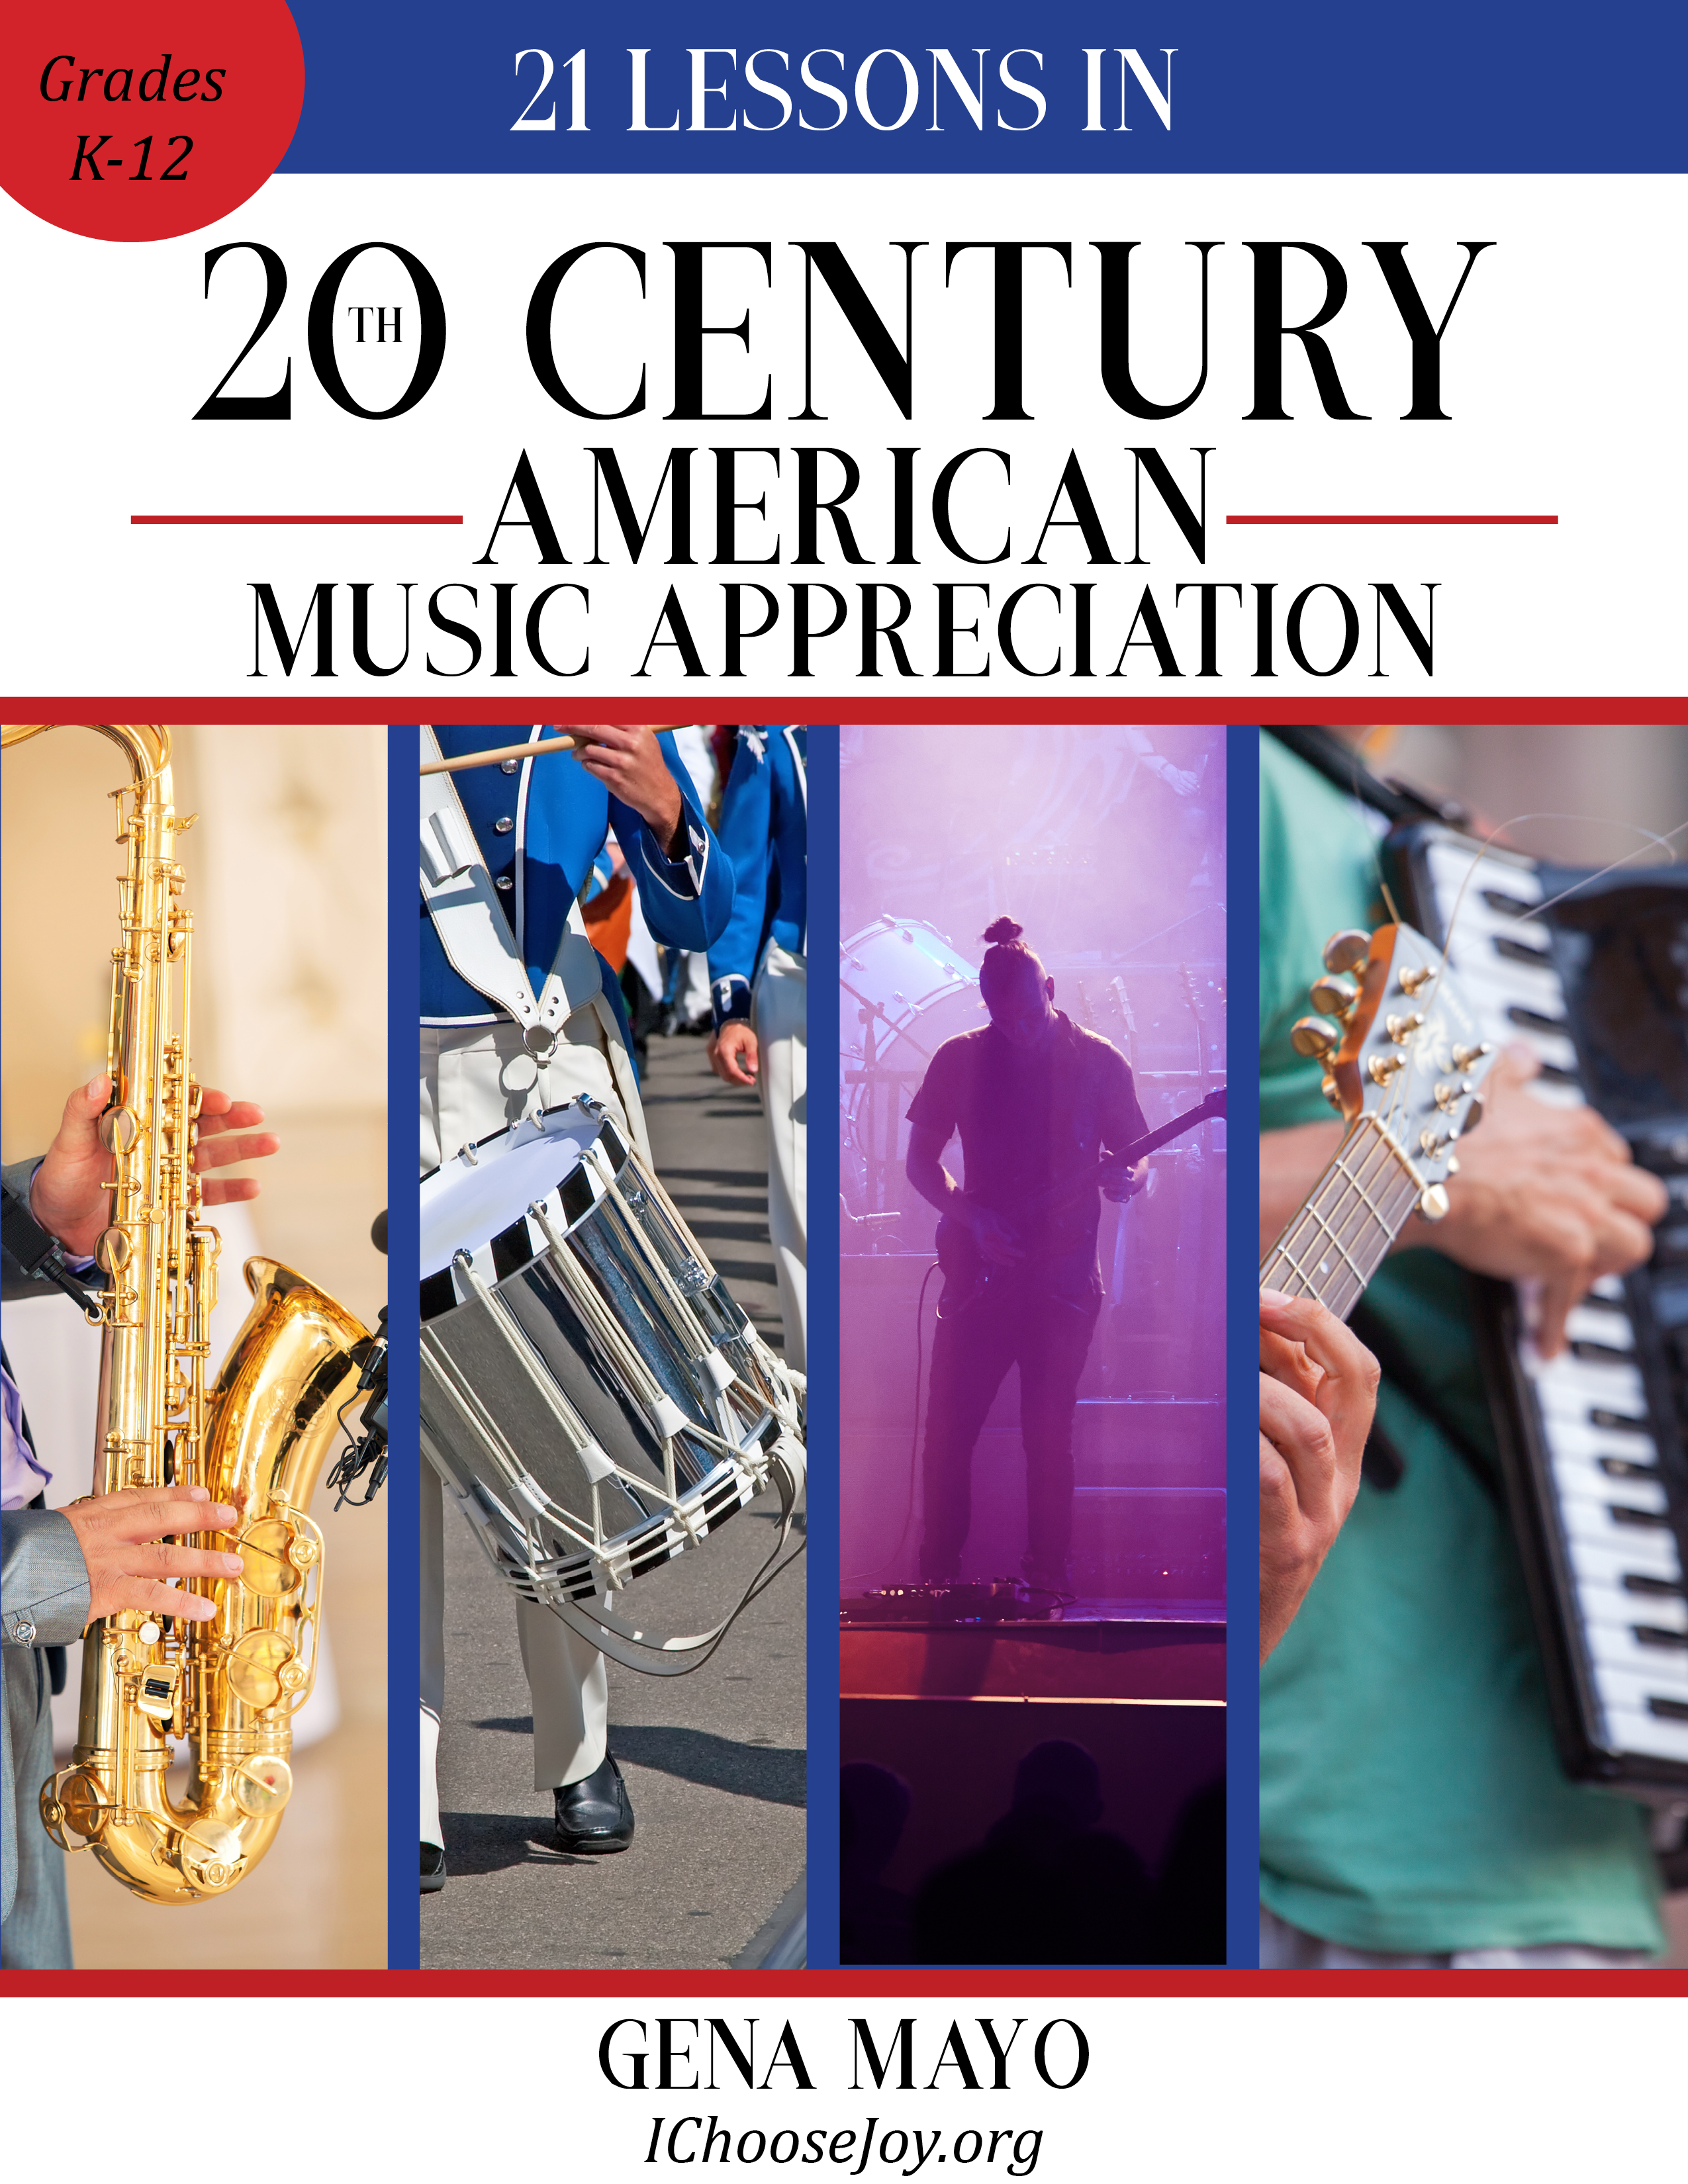 Intro to “21 Lessons in 20th Century American Music Appreciation” curriculum